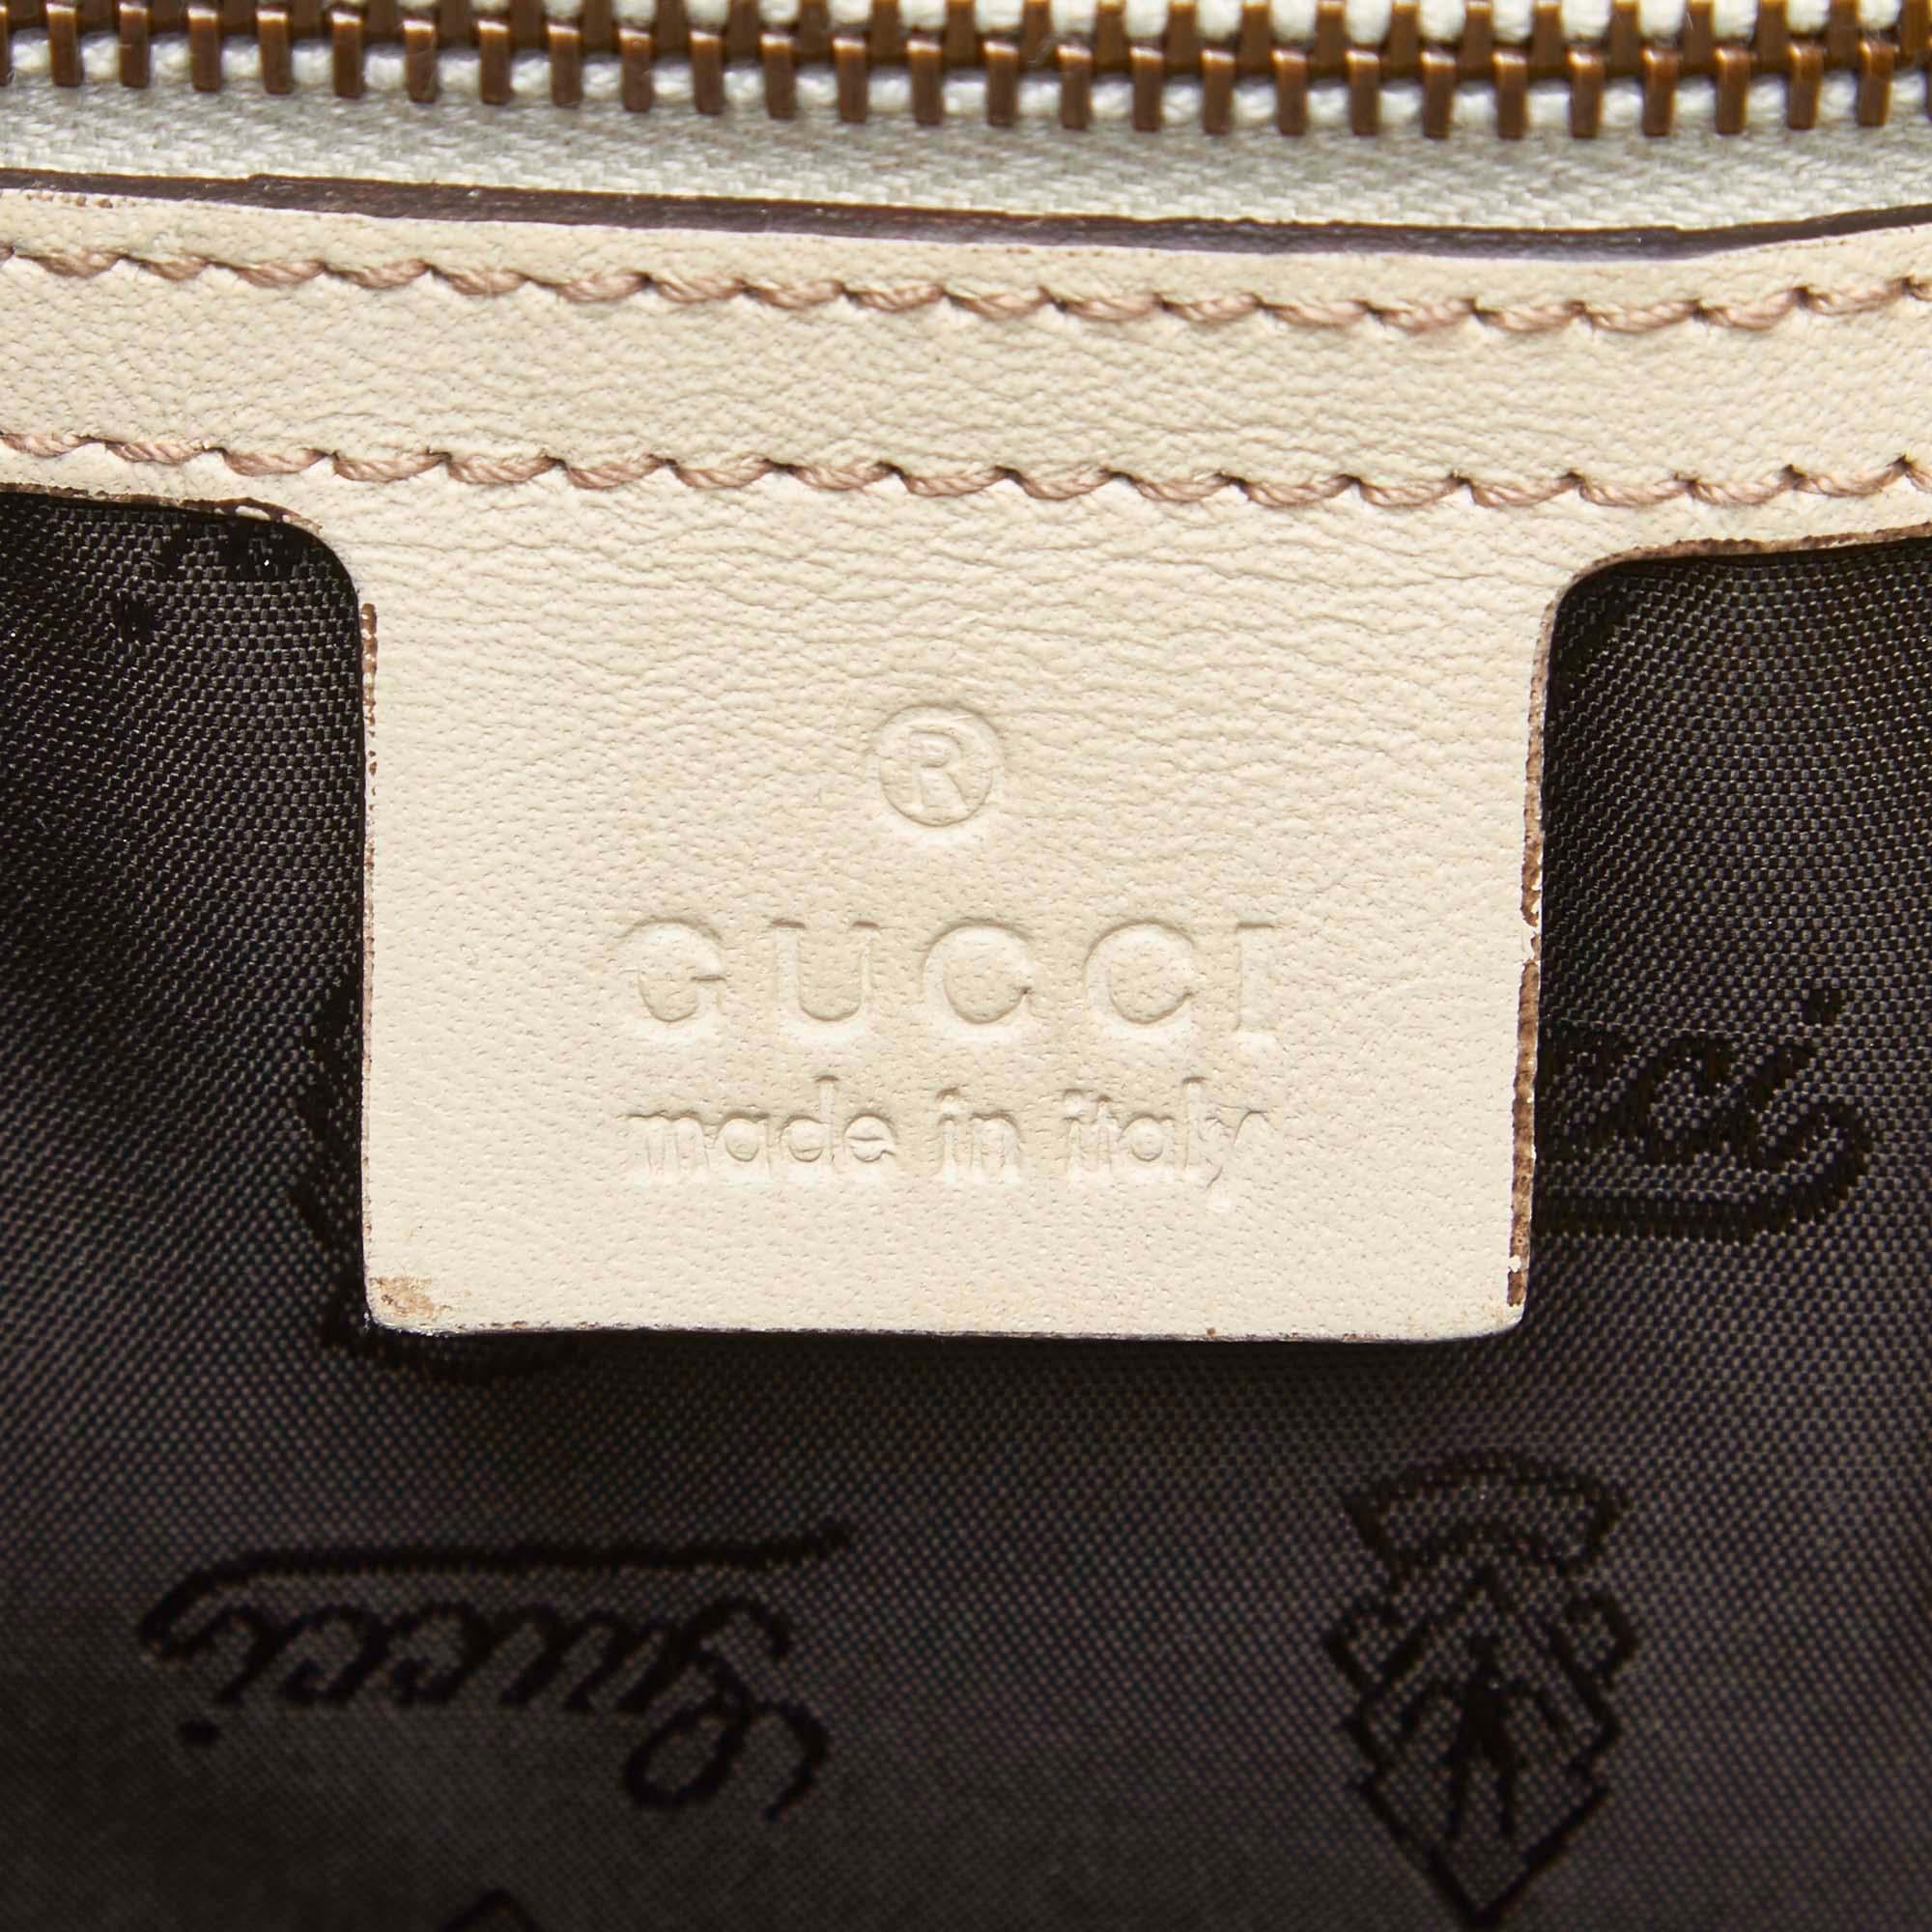 Gucci White Leather Jockey Tote For Sale 2